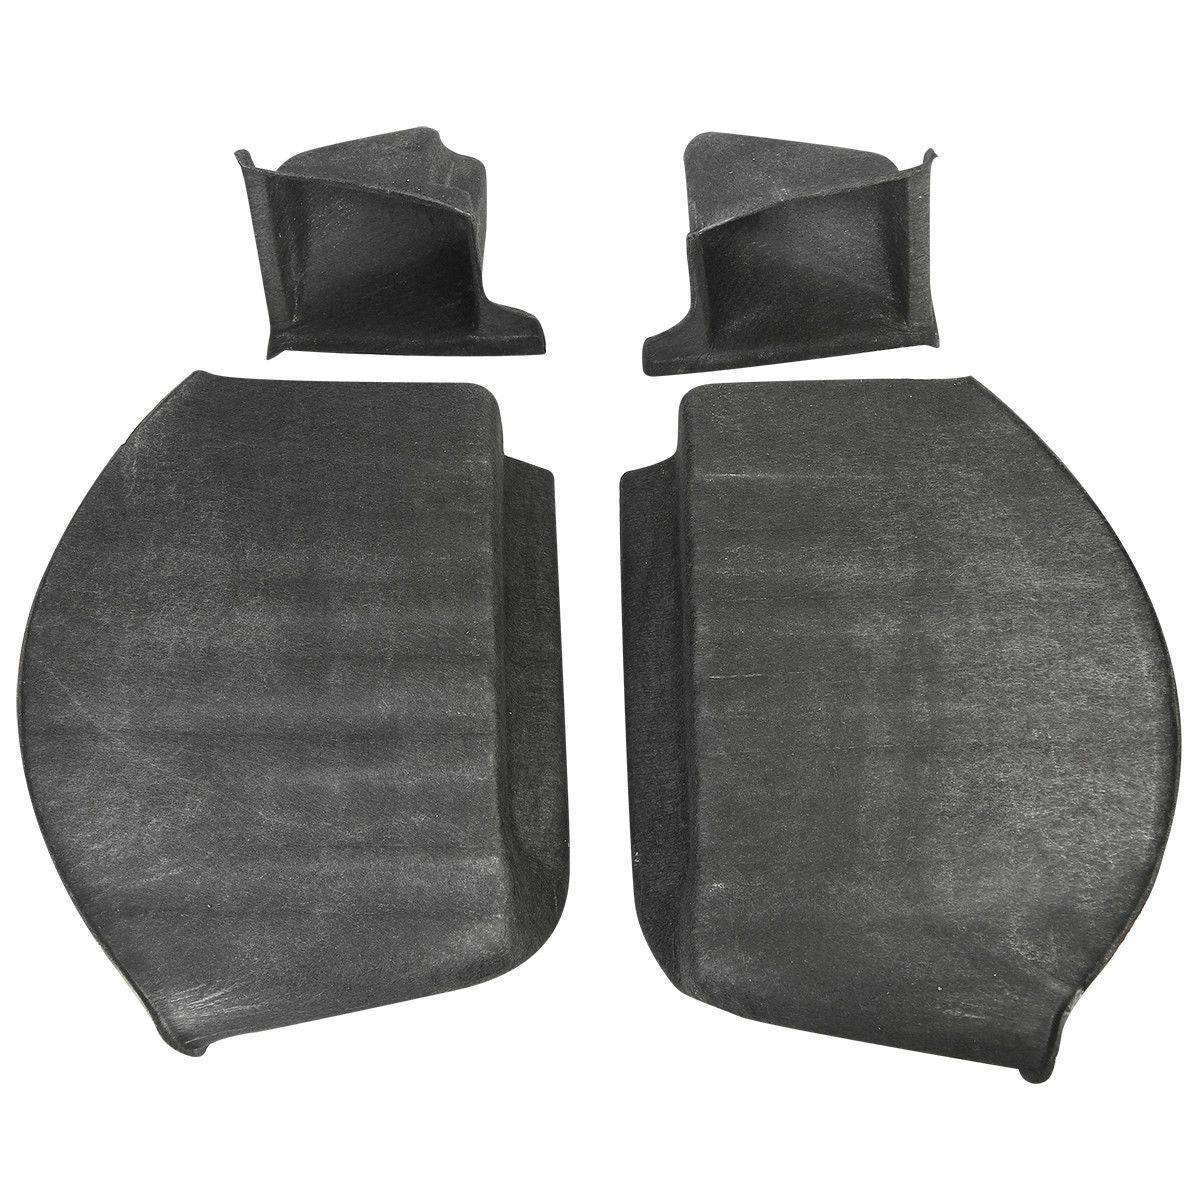 Saddlebags Carpet Liner For Indian Chieftain Dark Horse 16-18 Roadmaster 15-18 - Moto Life Products